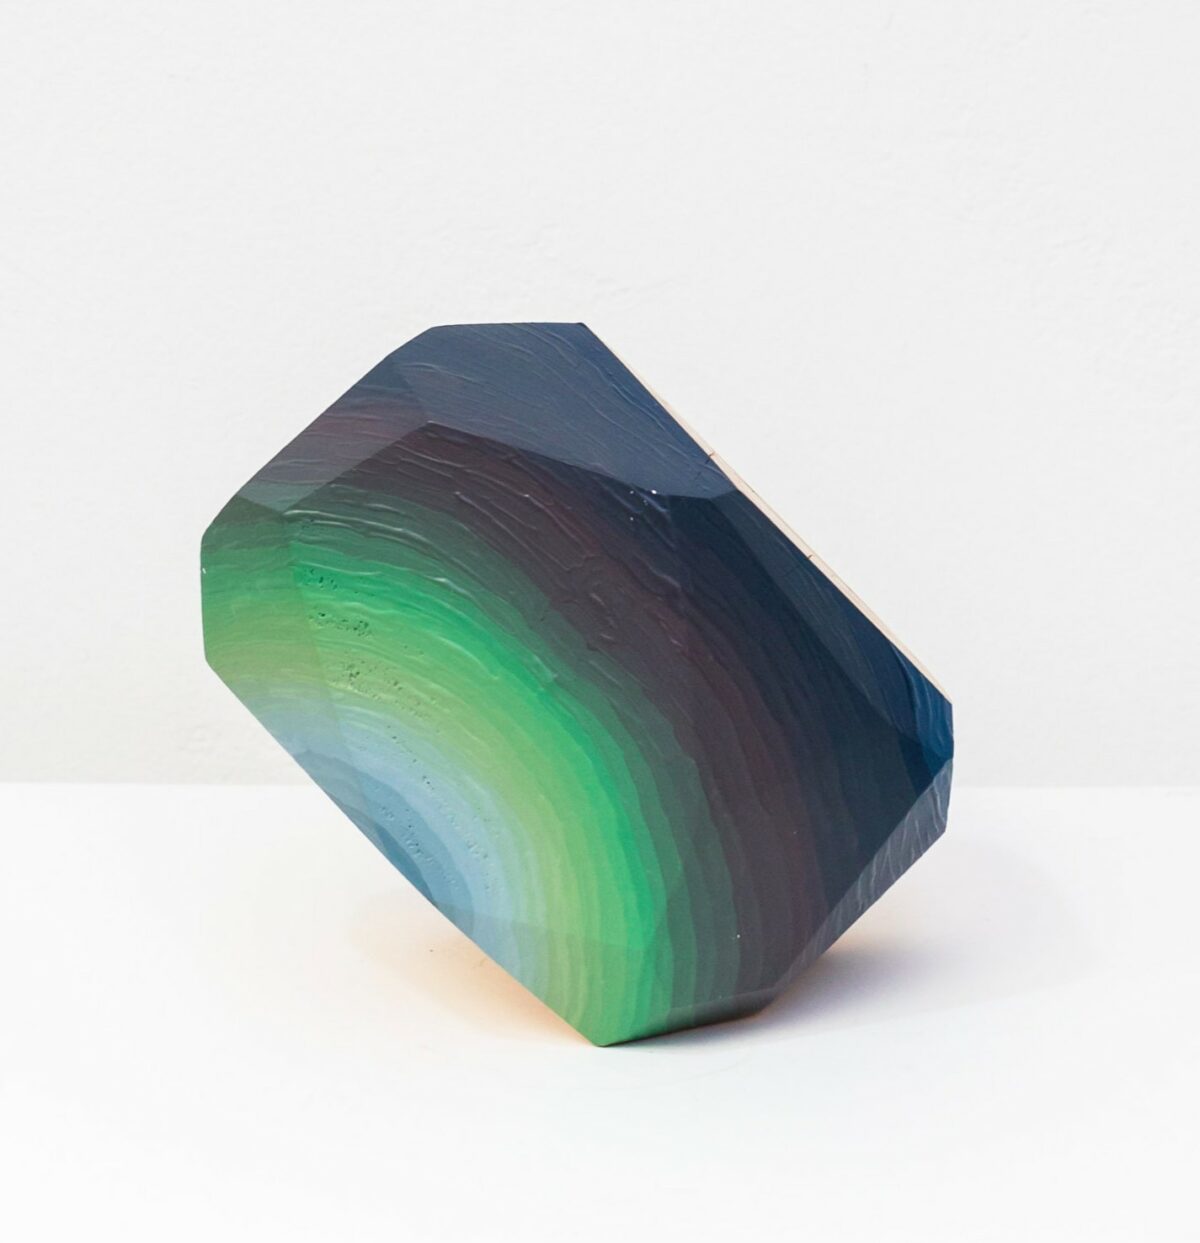 Wood Gemstones Colorful Abstract Sculptures By Victoria Wagner (3)